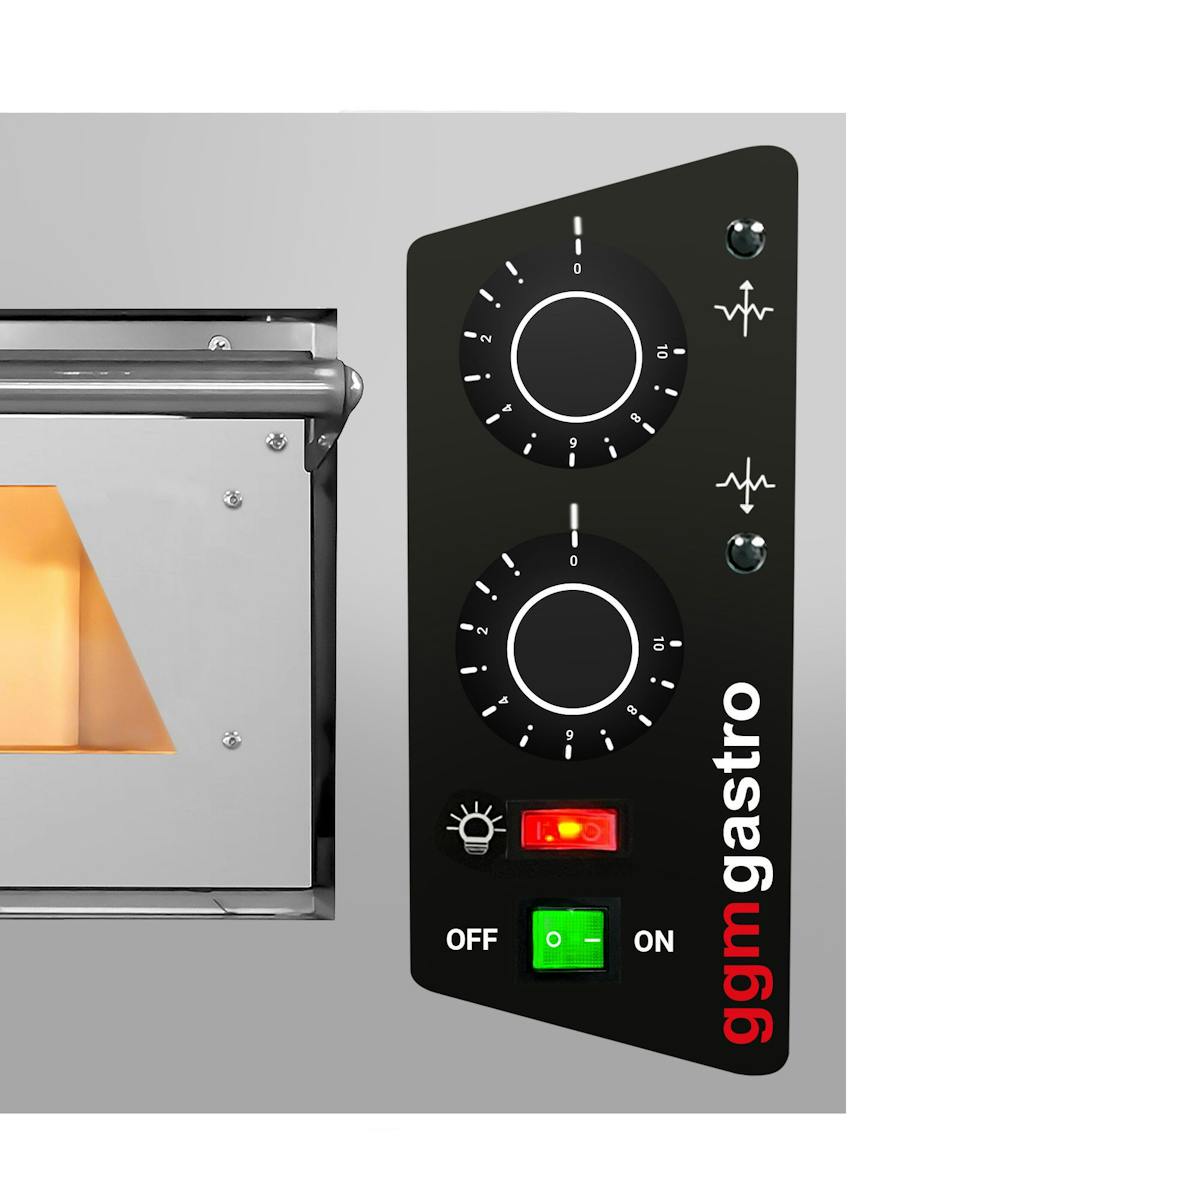 (2 pieces) Electric pizza oven - 1+1x 35cm - Manual